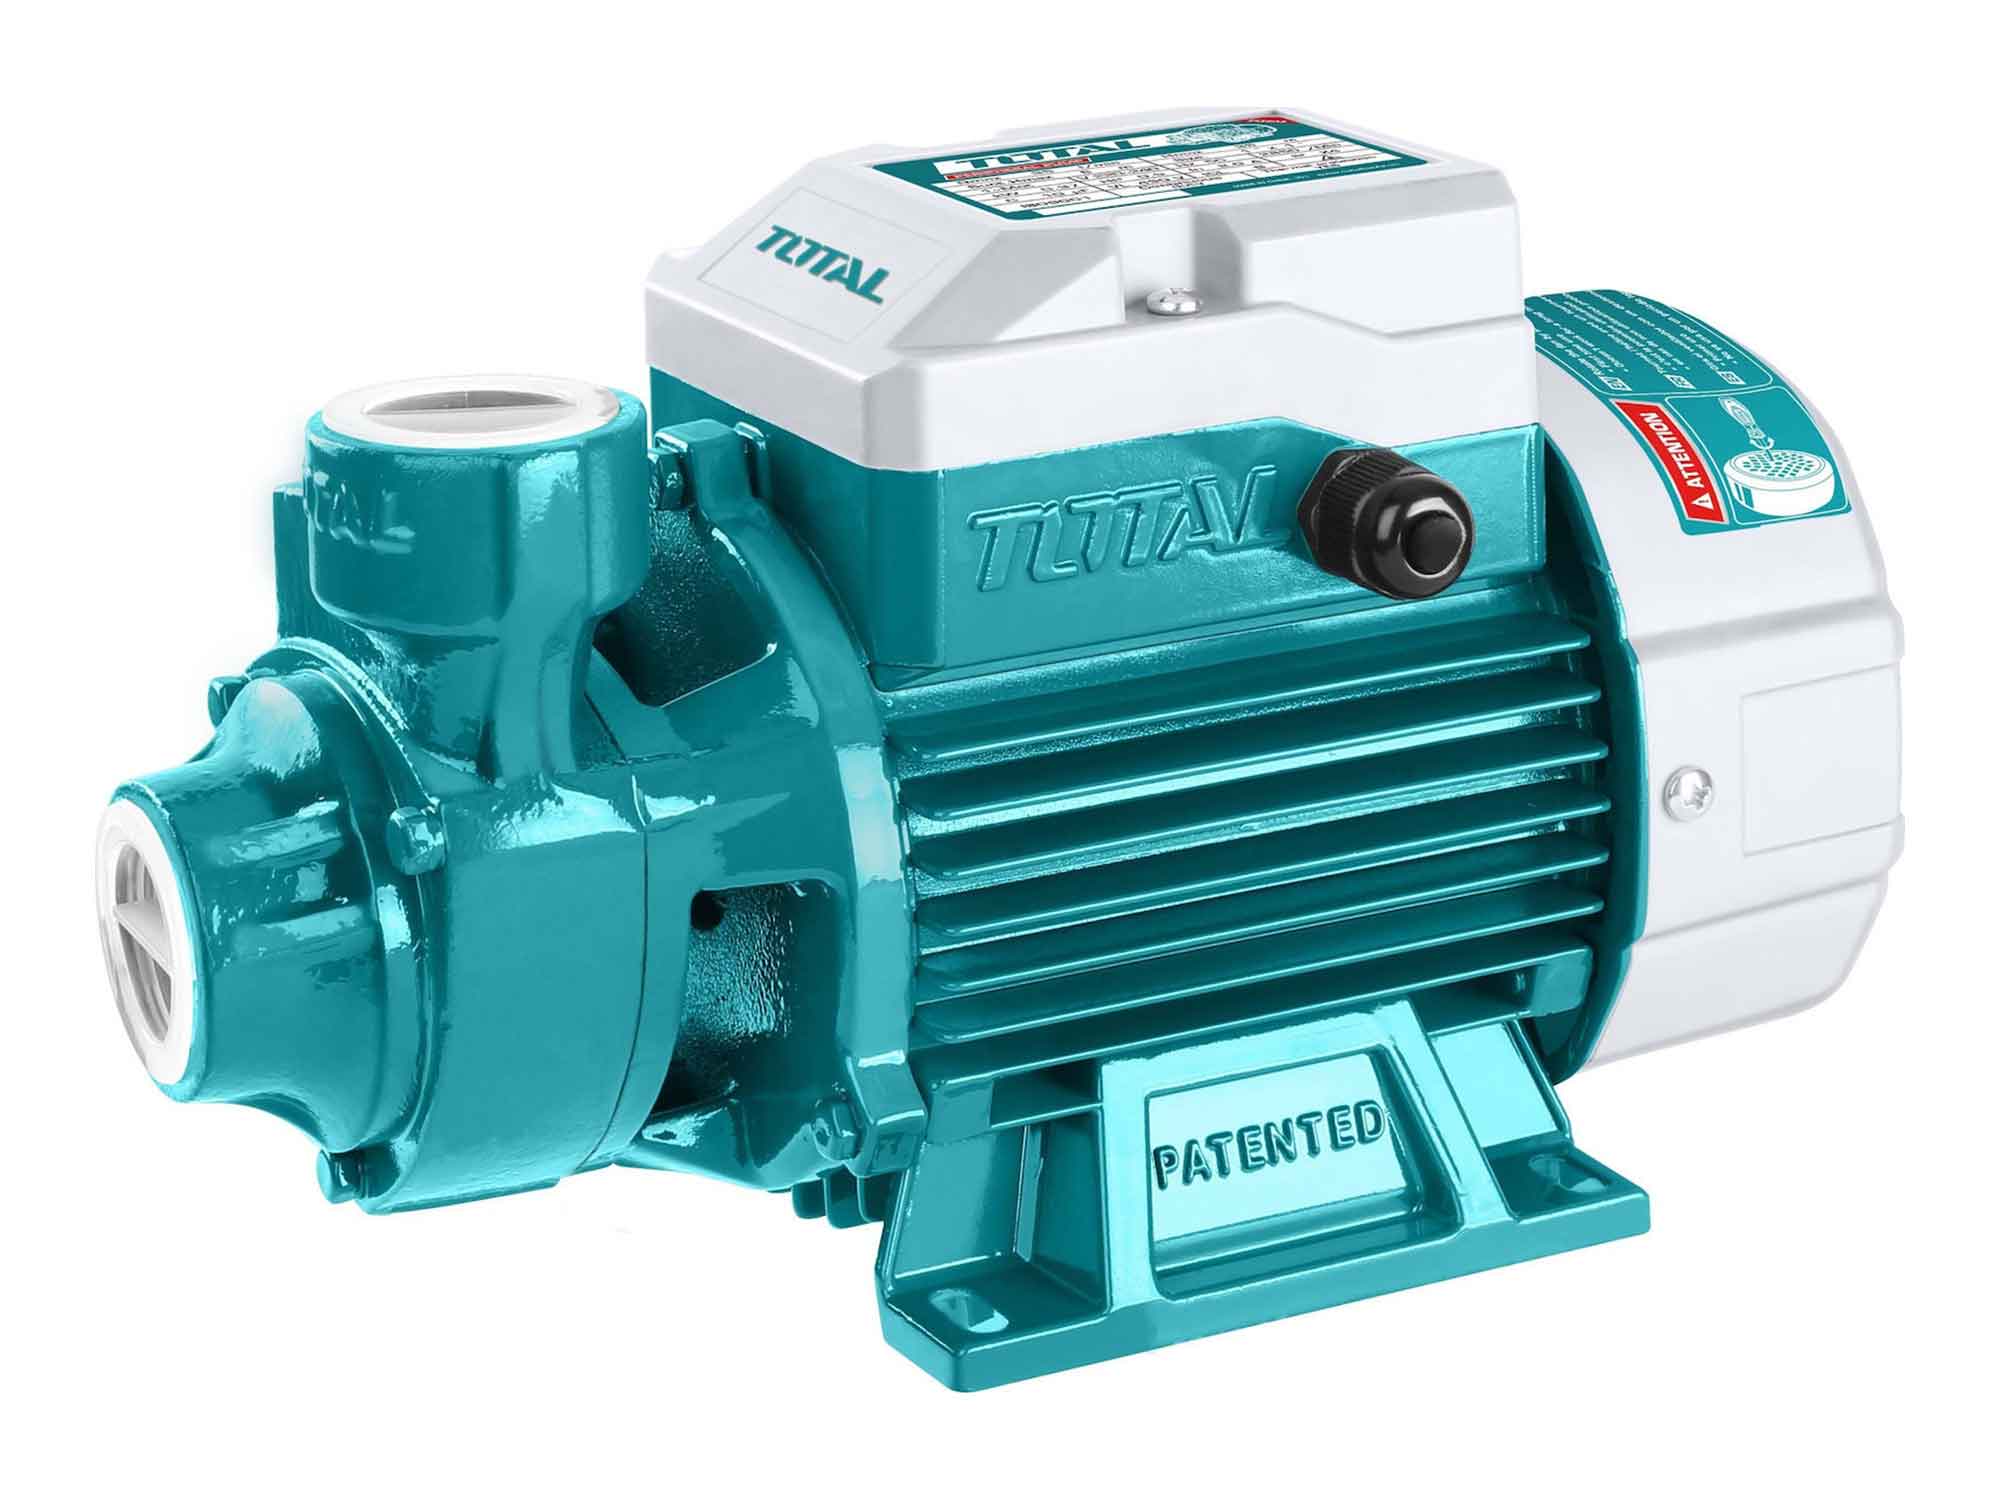 Total Peripheral Water Pump 370W (0.5HP) - TWP137026 | Supply Master | Accra, Ghana Peripheral Pumps Buy Tools hardware Building materials